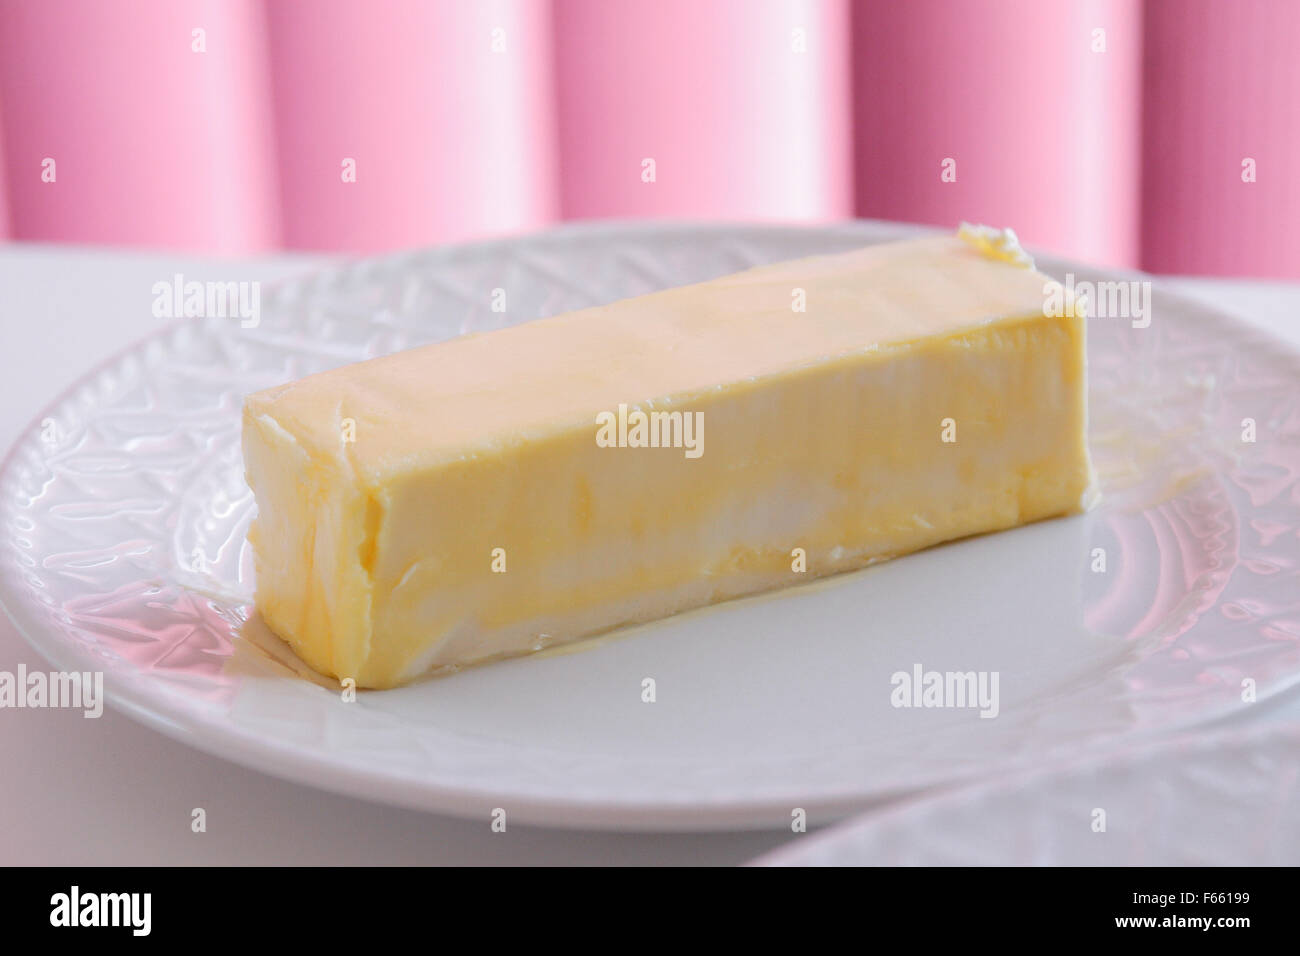 Butter or margarine on a white ceramic plate with pink blinds in the background on a white table. Stock Photo